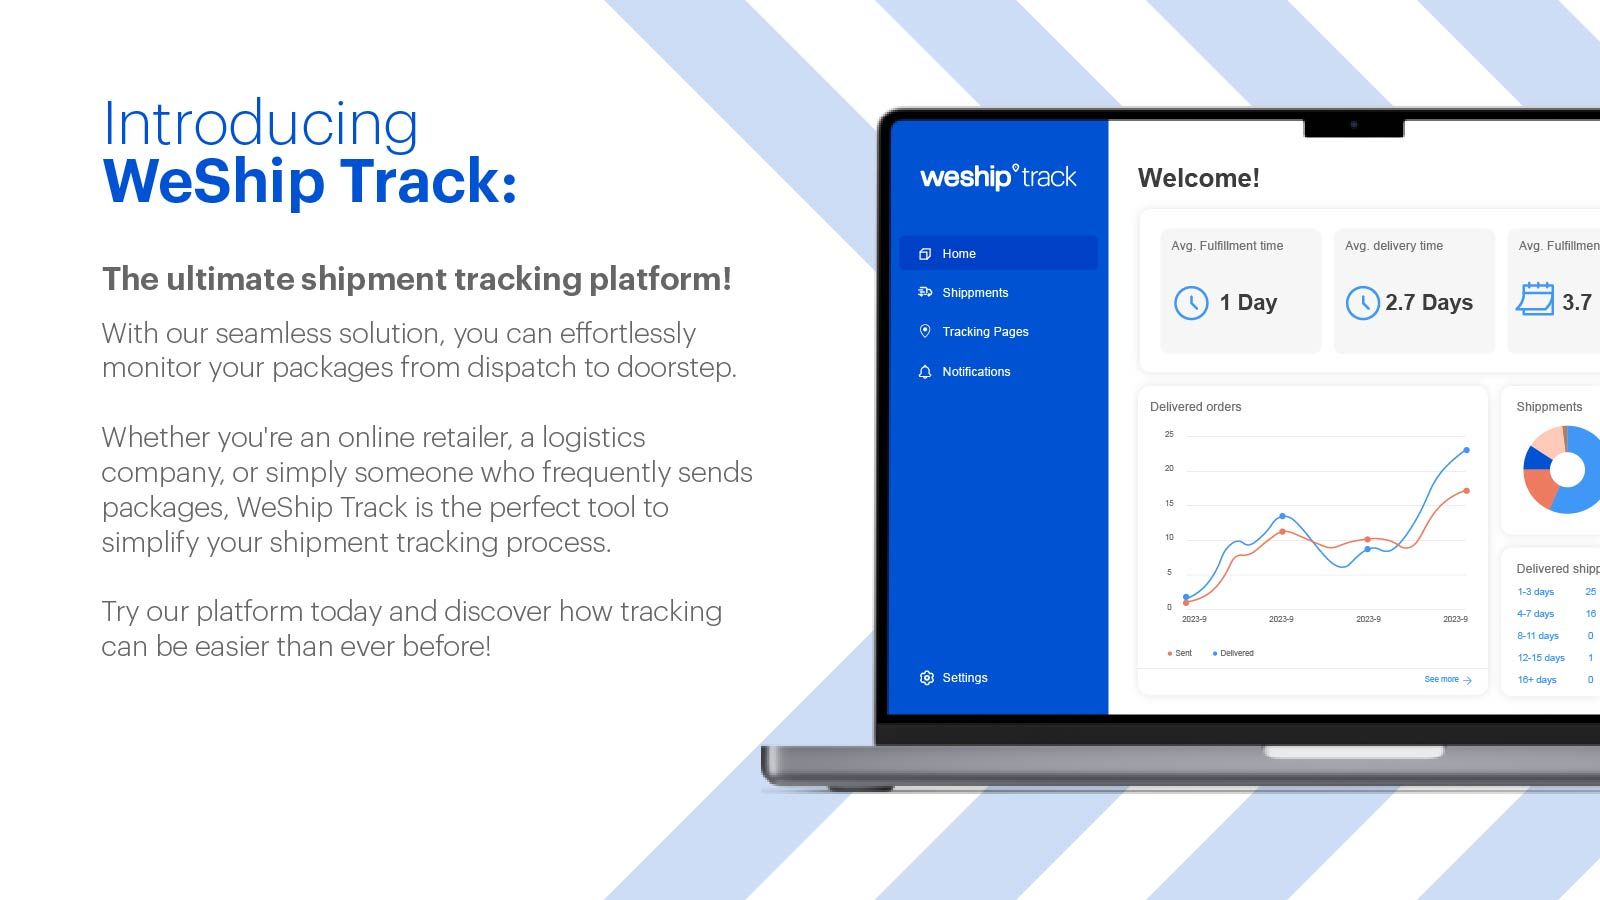  The ultimate shipment tracking software!